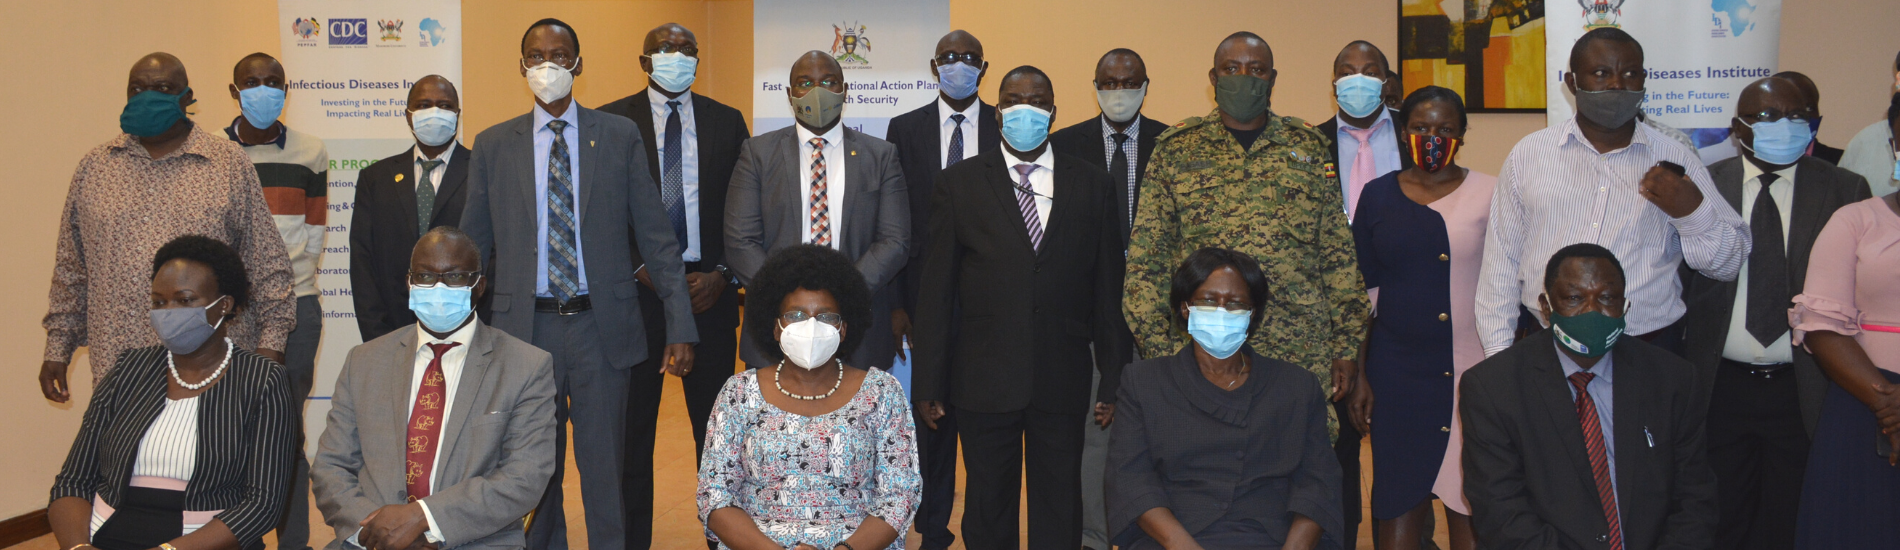 Dr Juliet Setumbwe, the director of Animal Resources at the Ministry of Agriculture Animal Industry and Fisheries has recognized the IDI for having hosted the One Health and environmental activities.